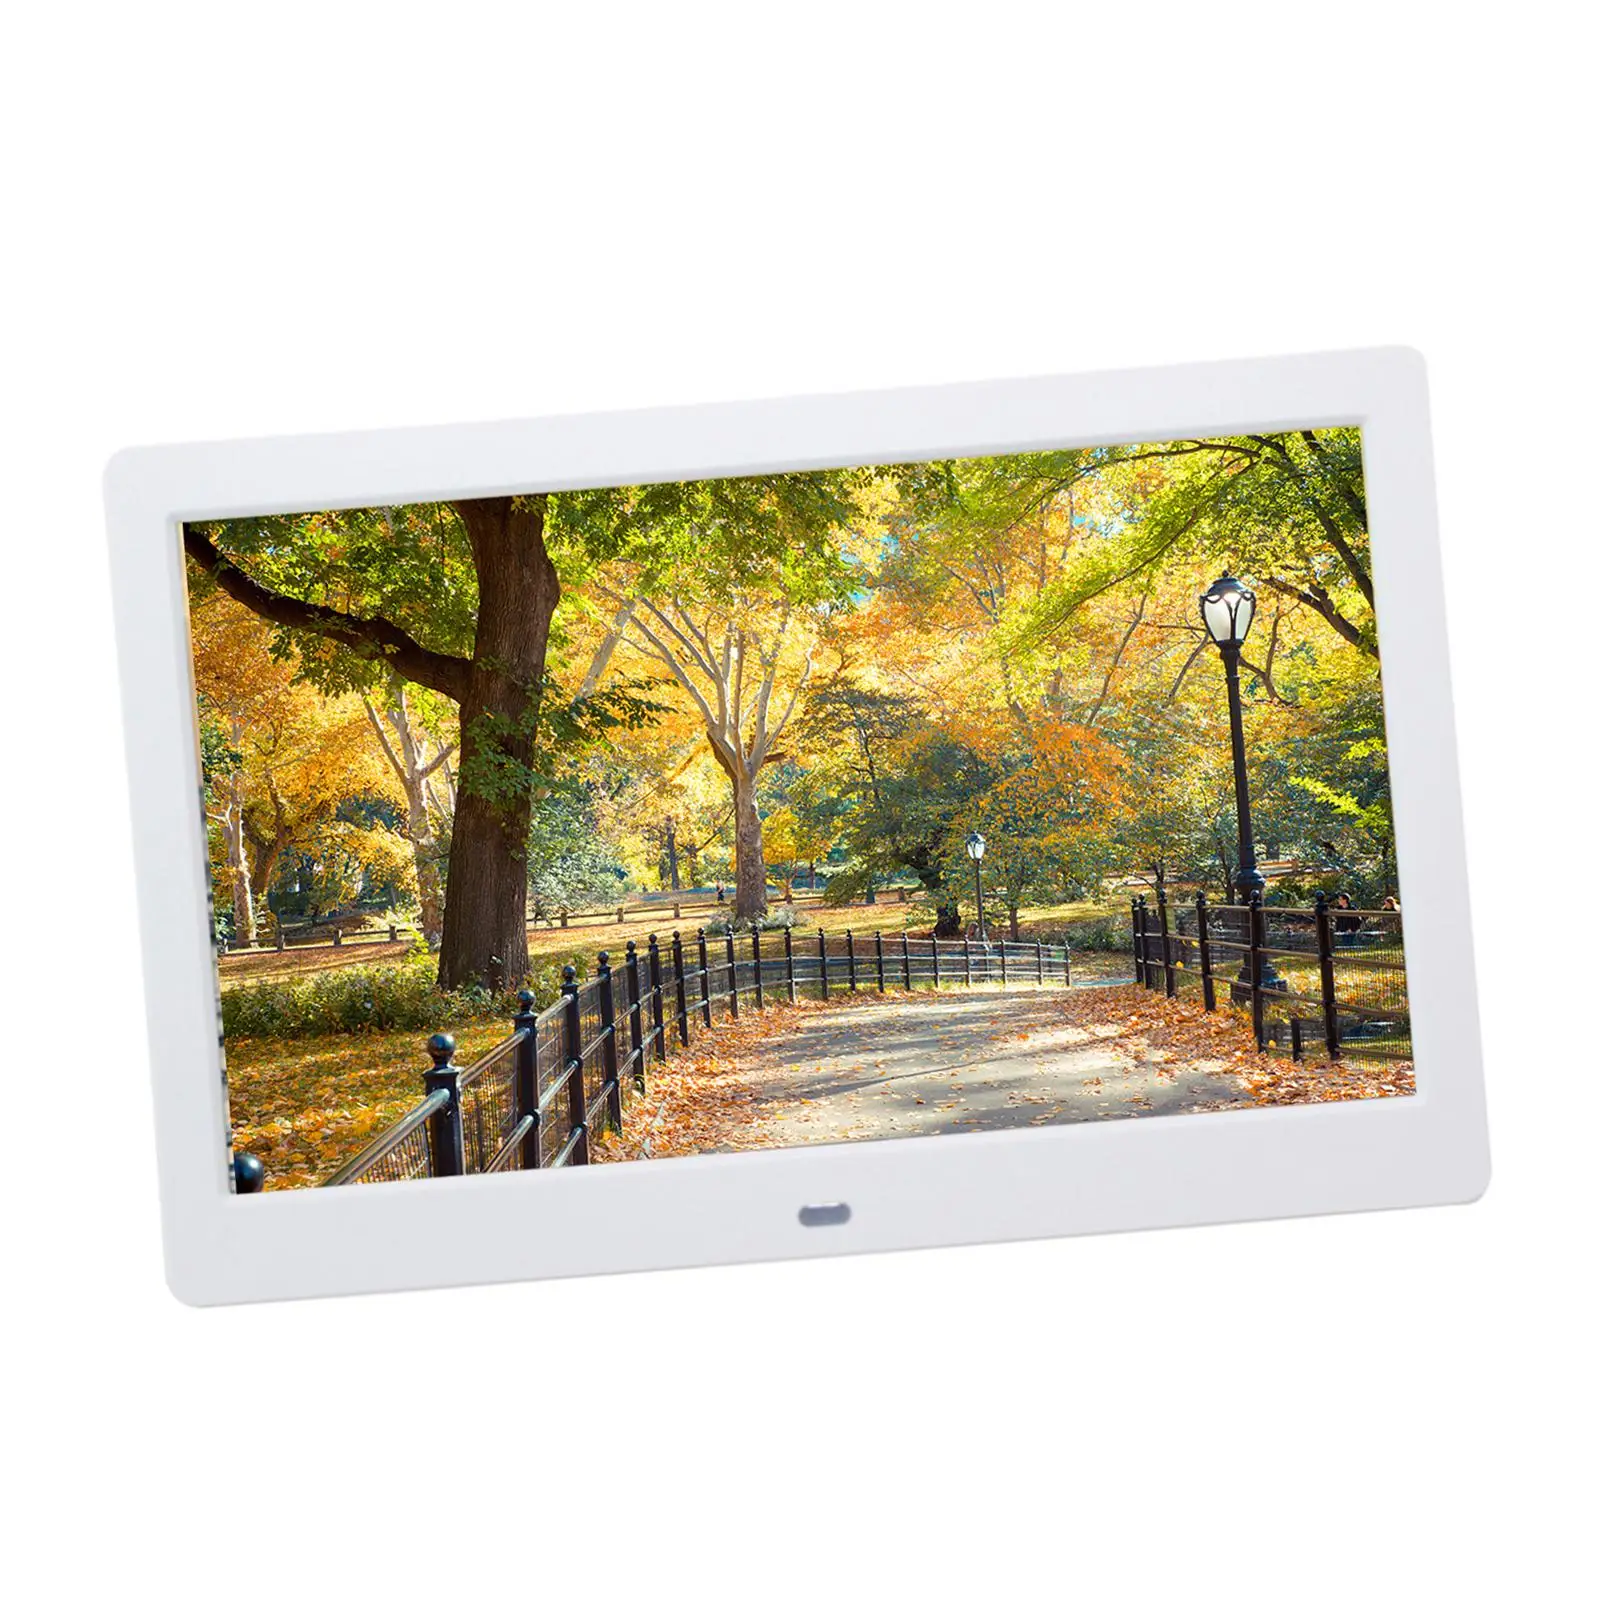 10Inches Electronic Digital Photo Frame White US Standard Plug Play Video,Photo,Music Multiple Functions Easily Install